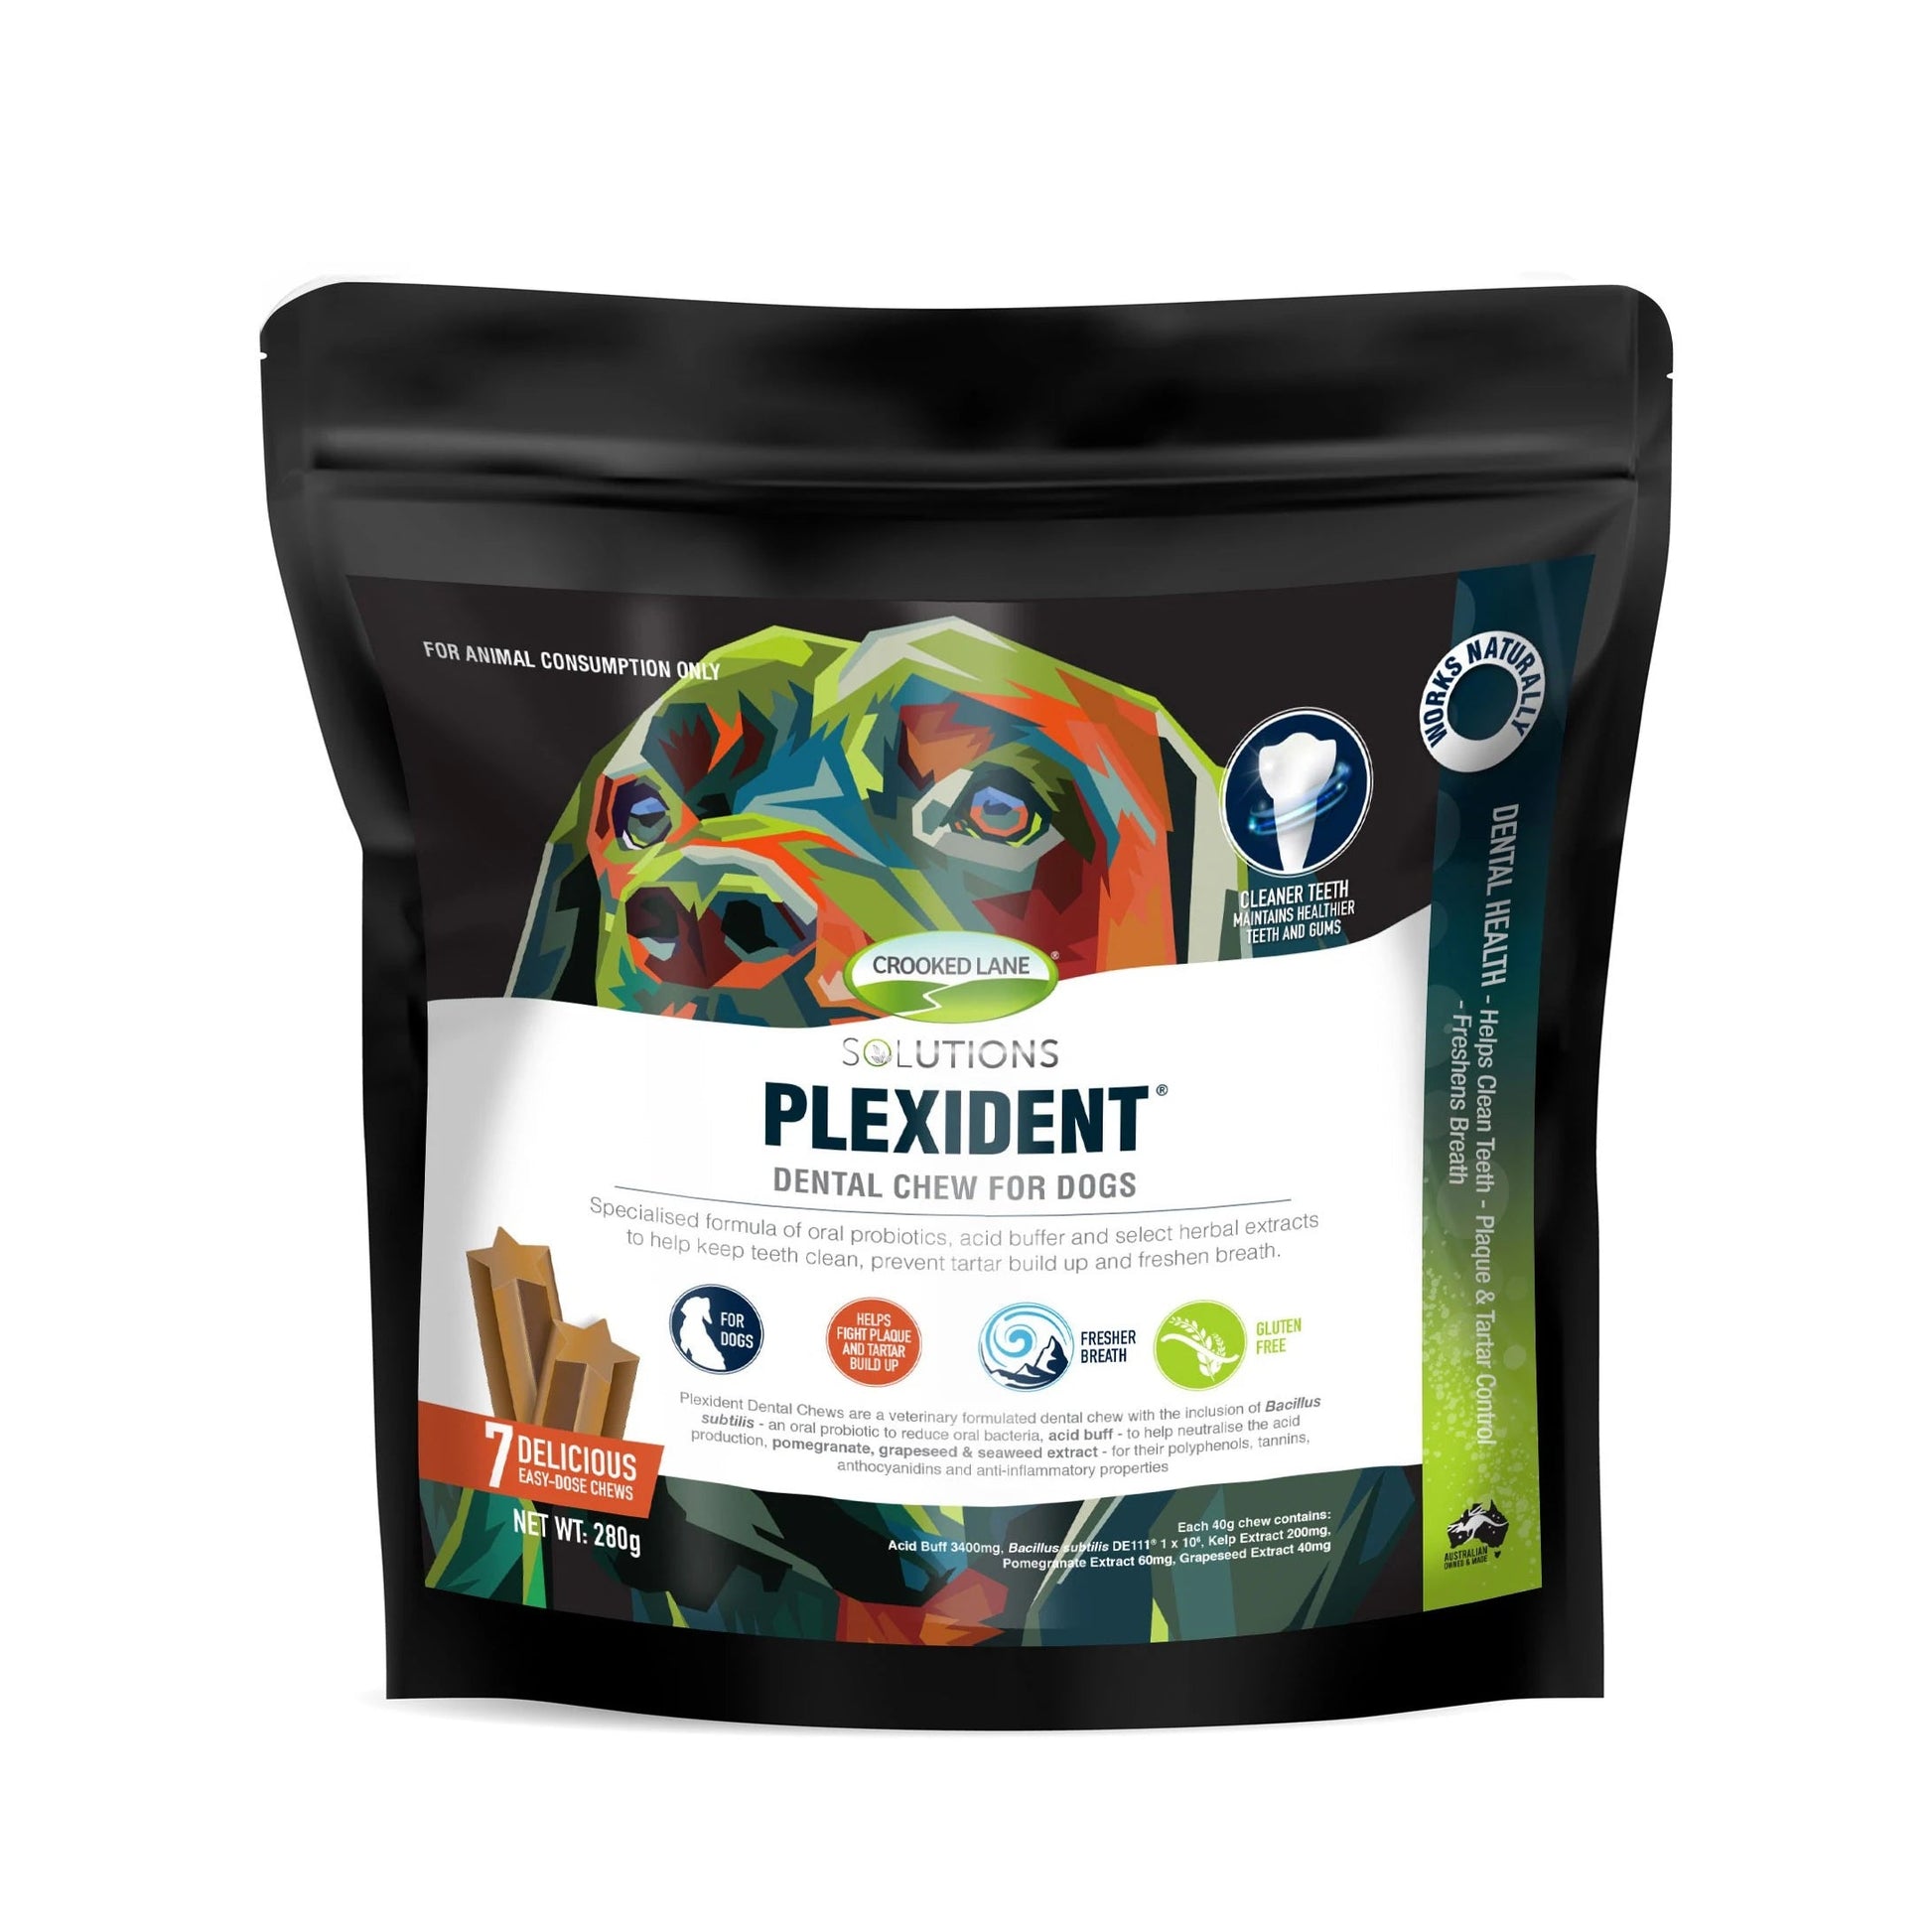 Crooked Lane Plexident Dental Chew for Dogs 280g - Woonona Petfood & Produce